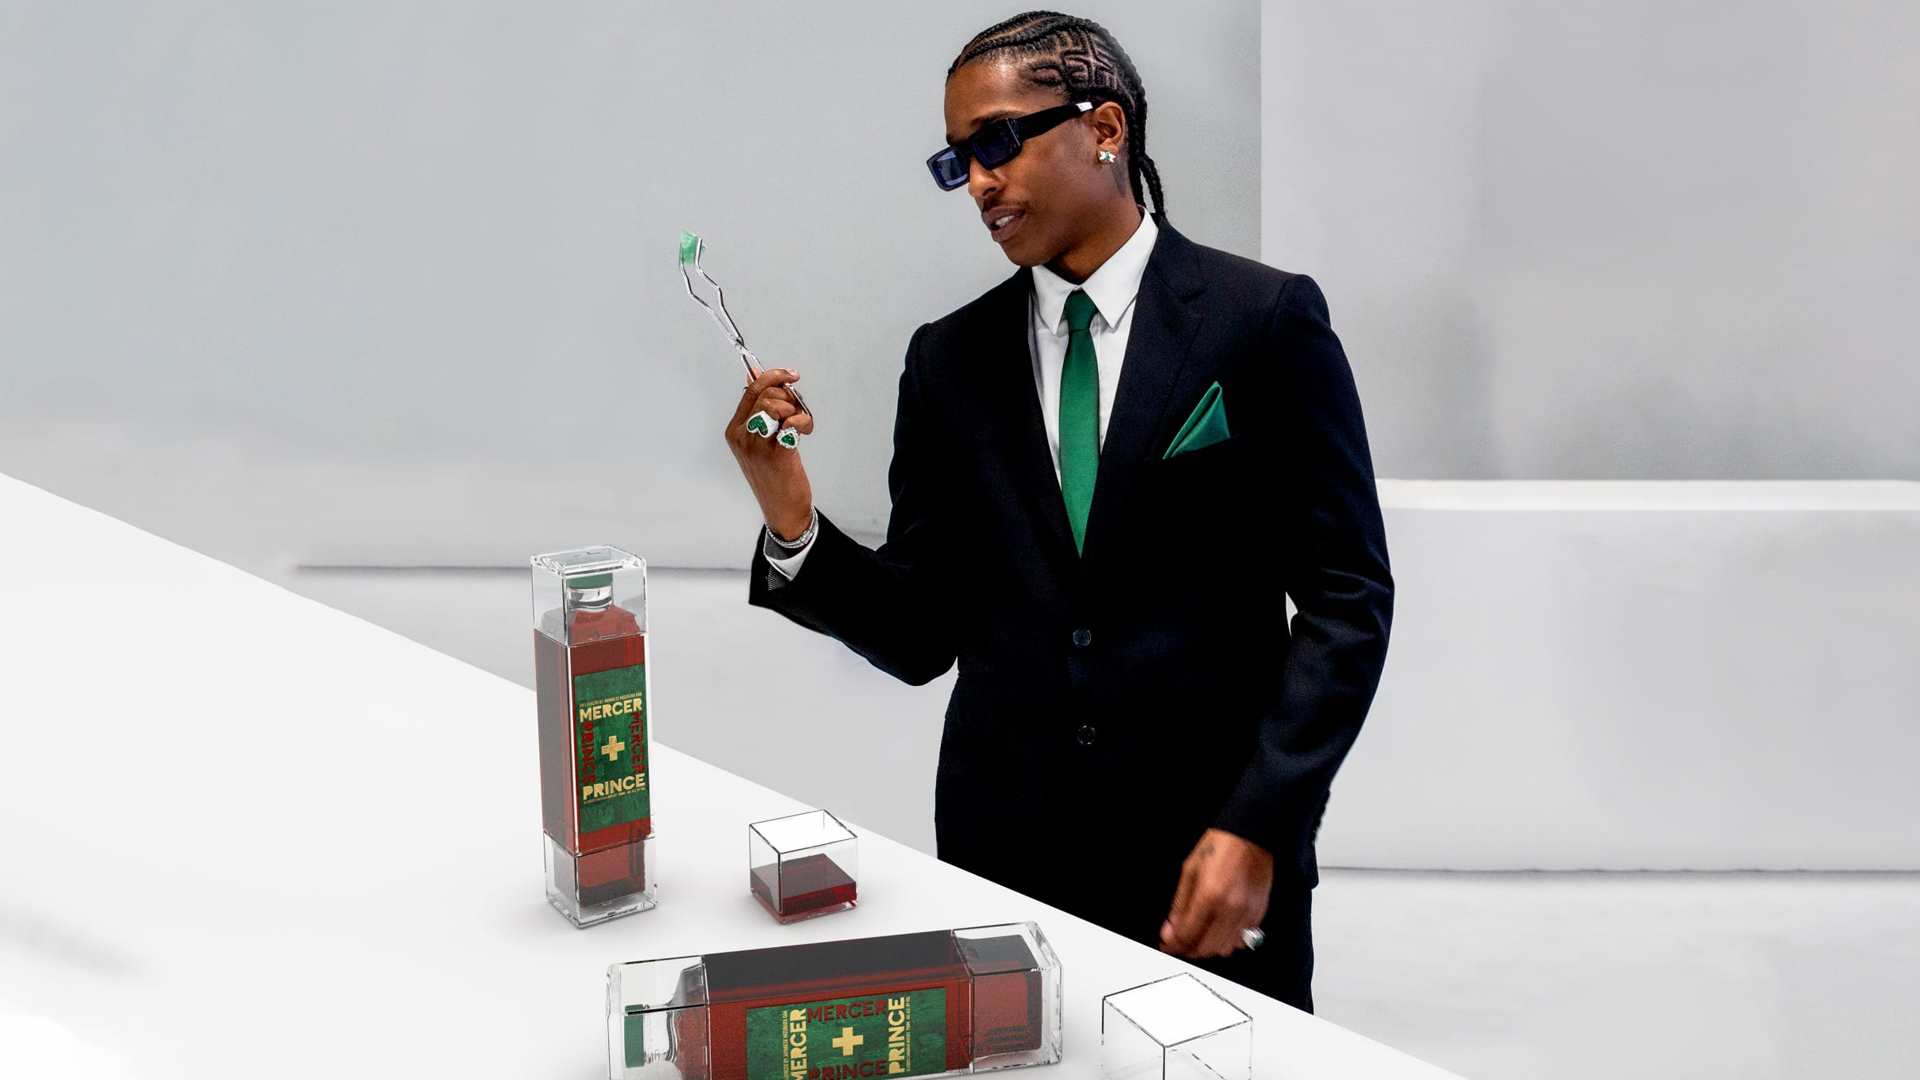 A$AP Rocky To Disrupt Norms Of Whiskey Production With Mercer + Prince